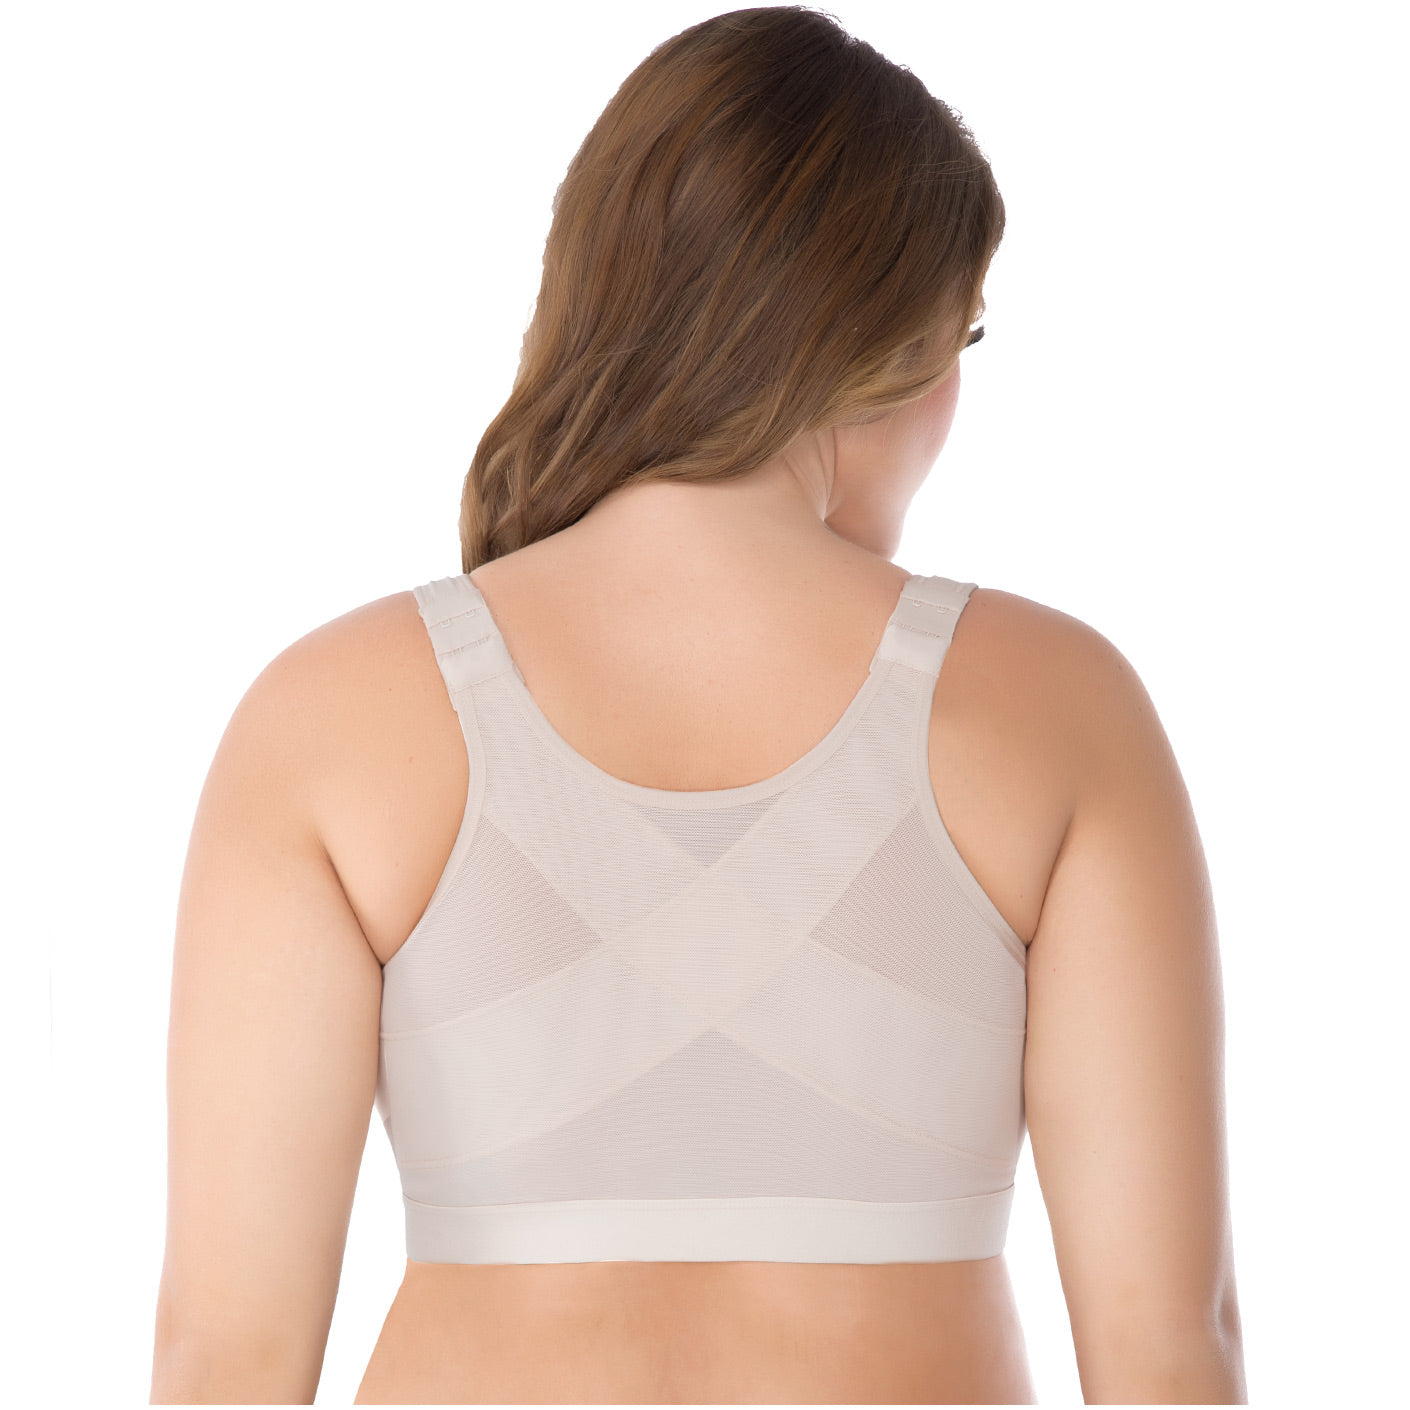 UpLady Extra Firm High Compression Full Cup Bra Ref 8532 (B, Beige, 32) at   Women's Clothing store